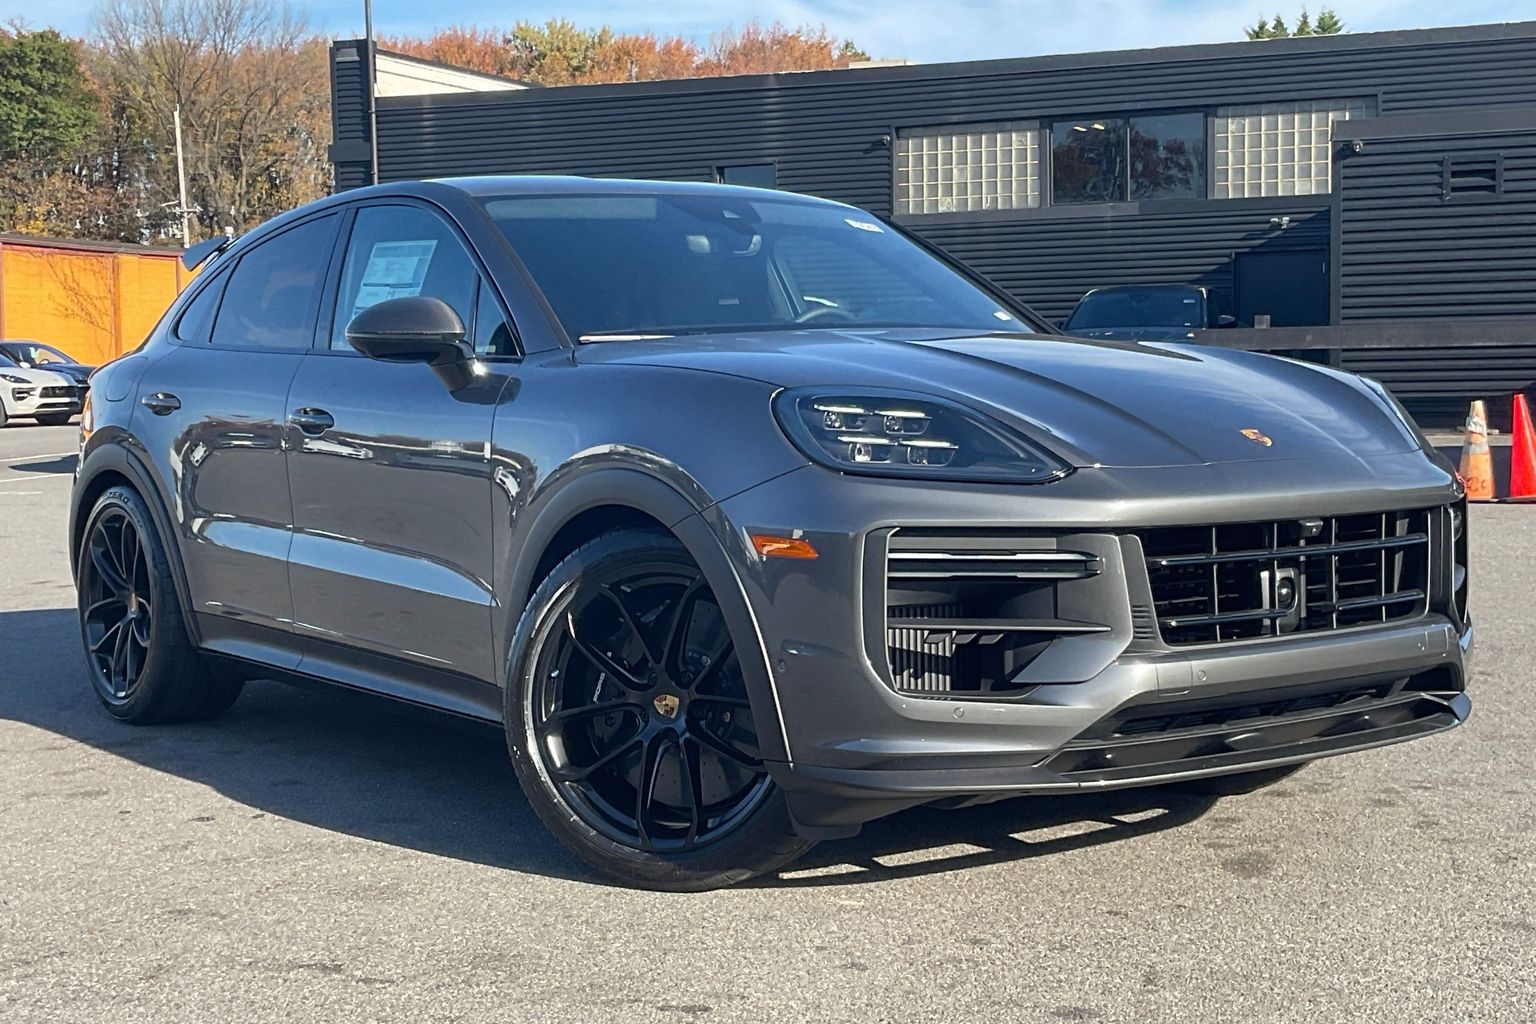 Porsche Cayenne Coupe Review 2024, Drive, Specs & Pricing